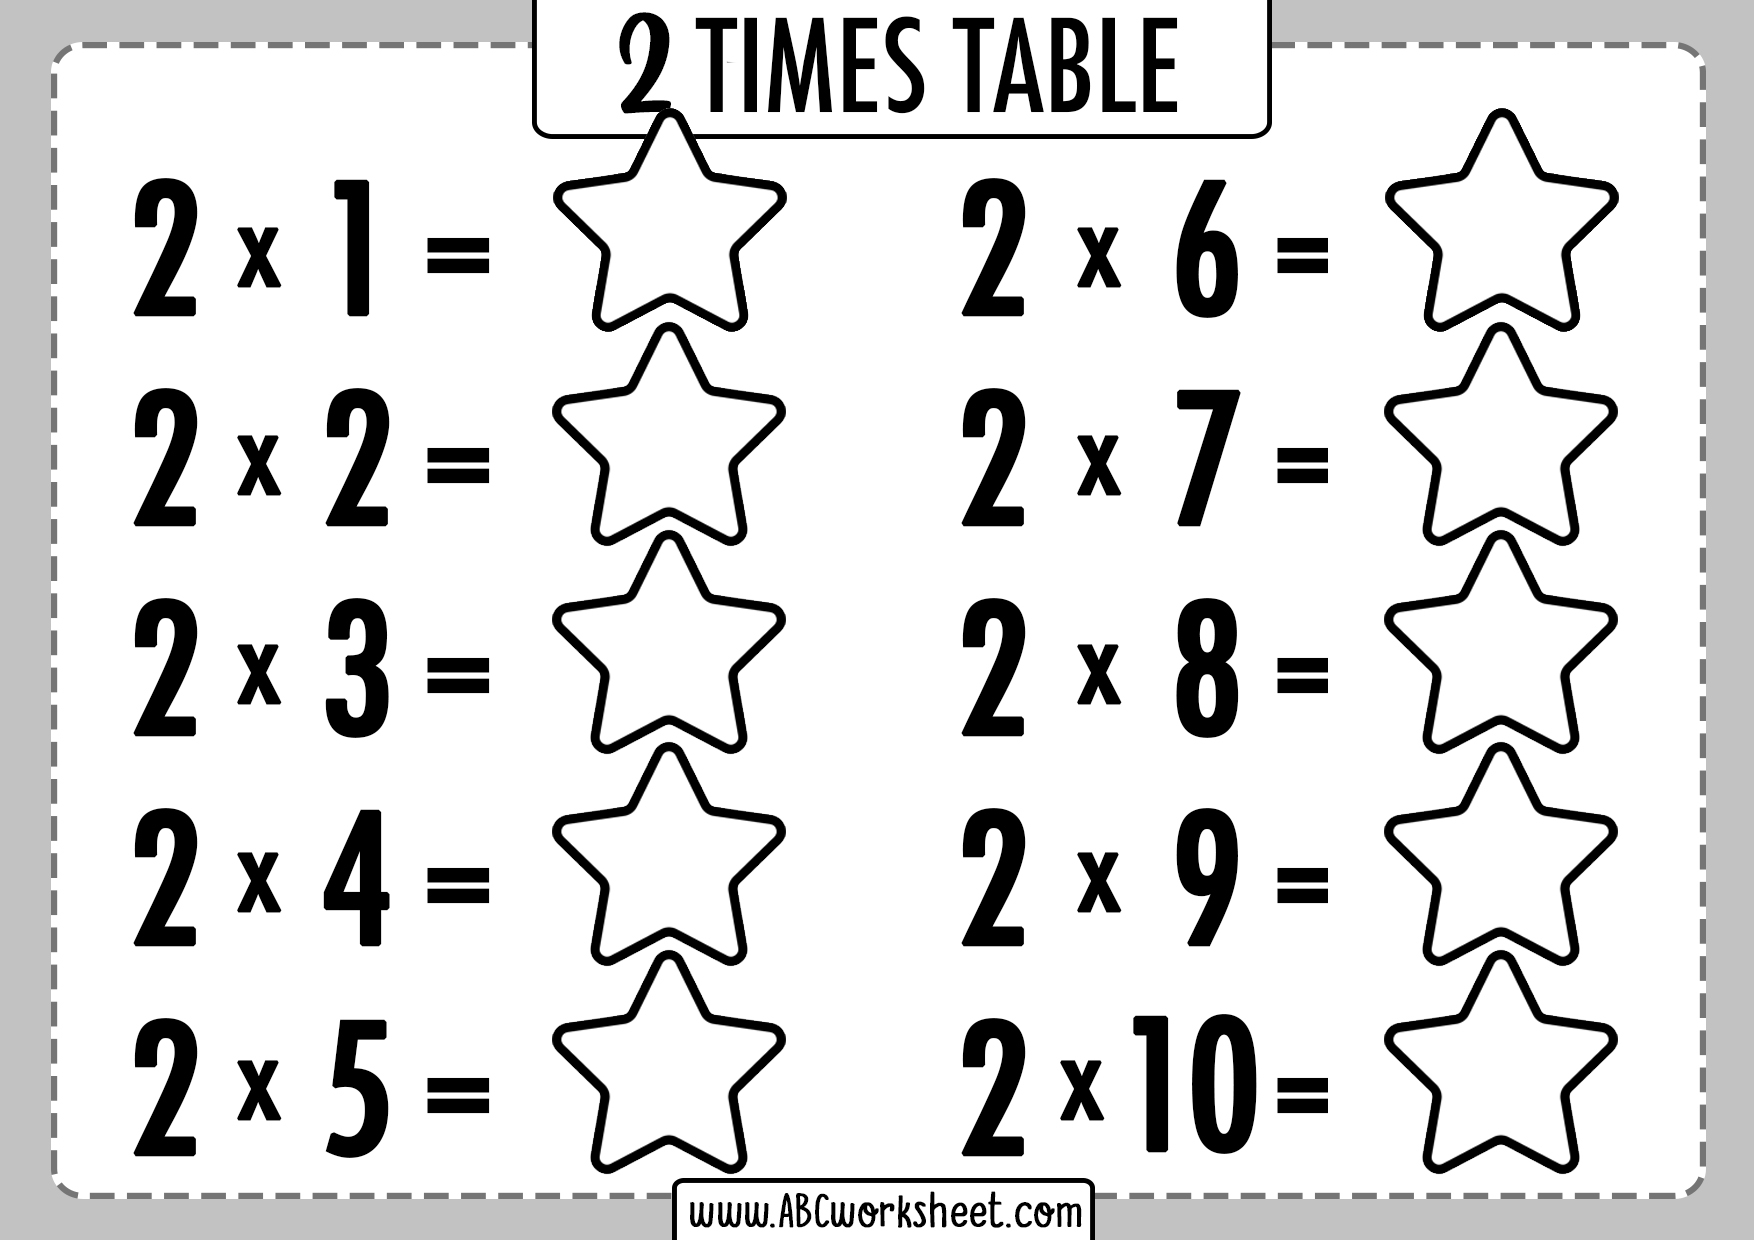 times-table-worksheets-1-12-activity-shelter